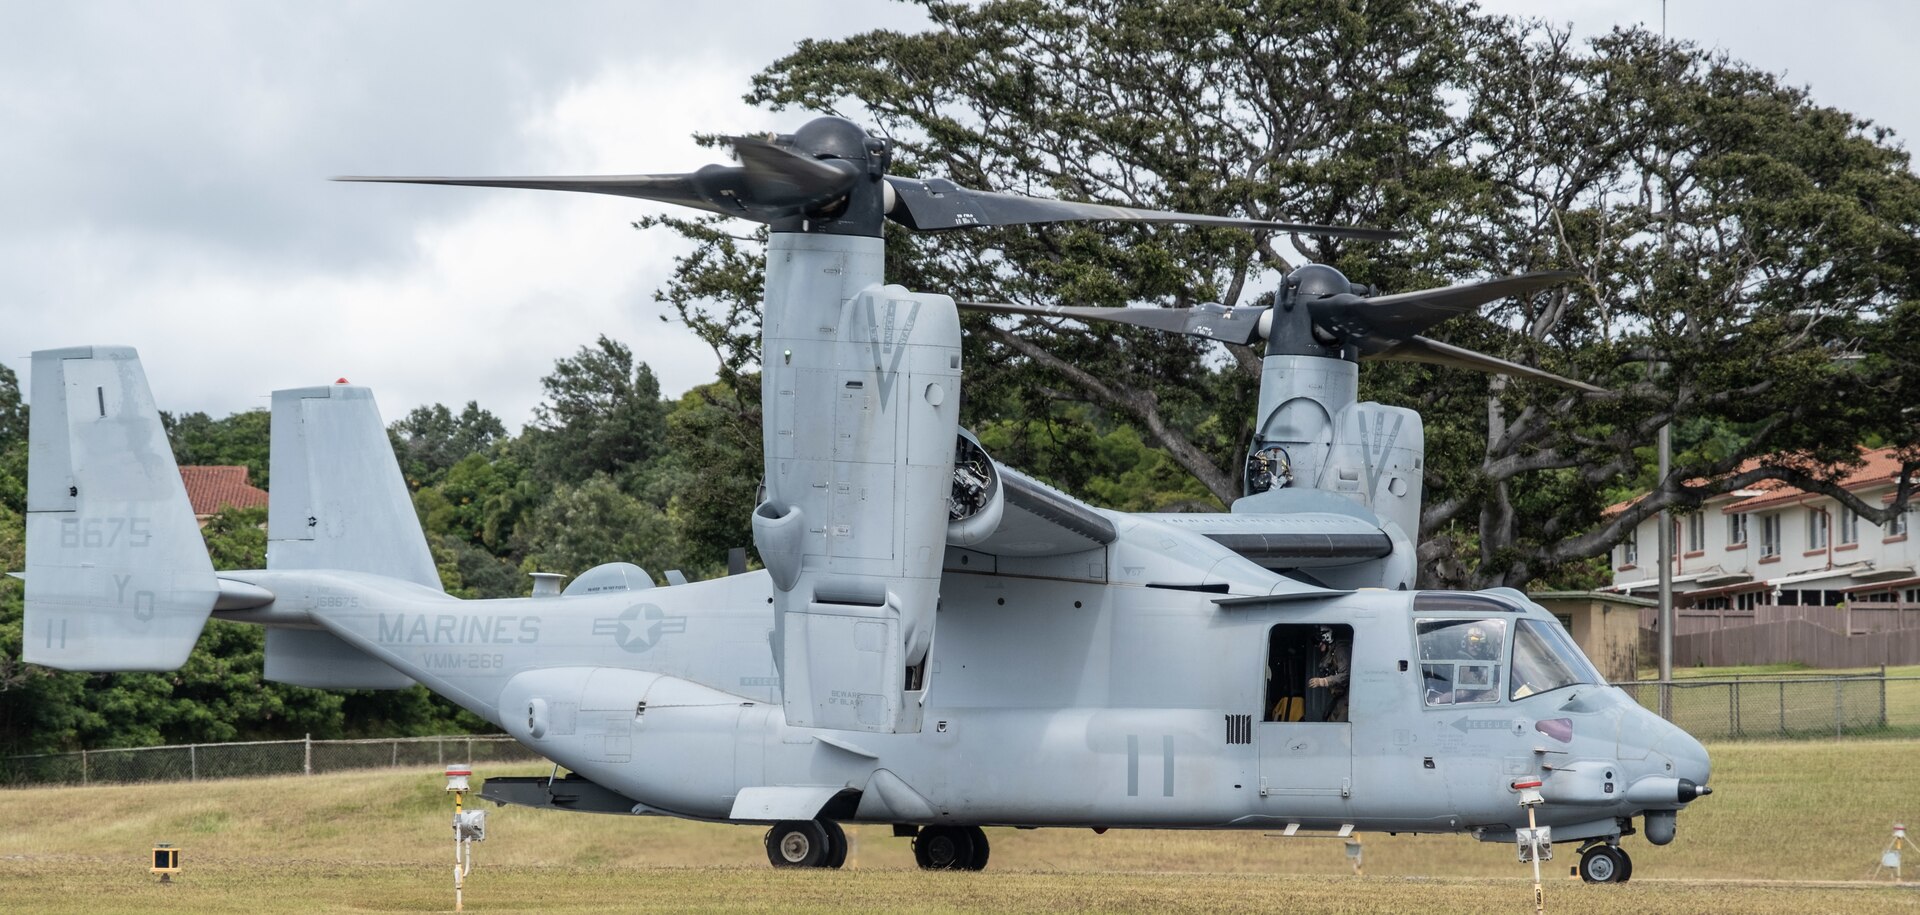 A single touch and go marks the first time an Osprey lands at Tripler. Check out the well organized and successful venture between Army and Marine Corps forces. Caring together.